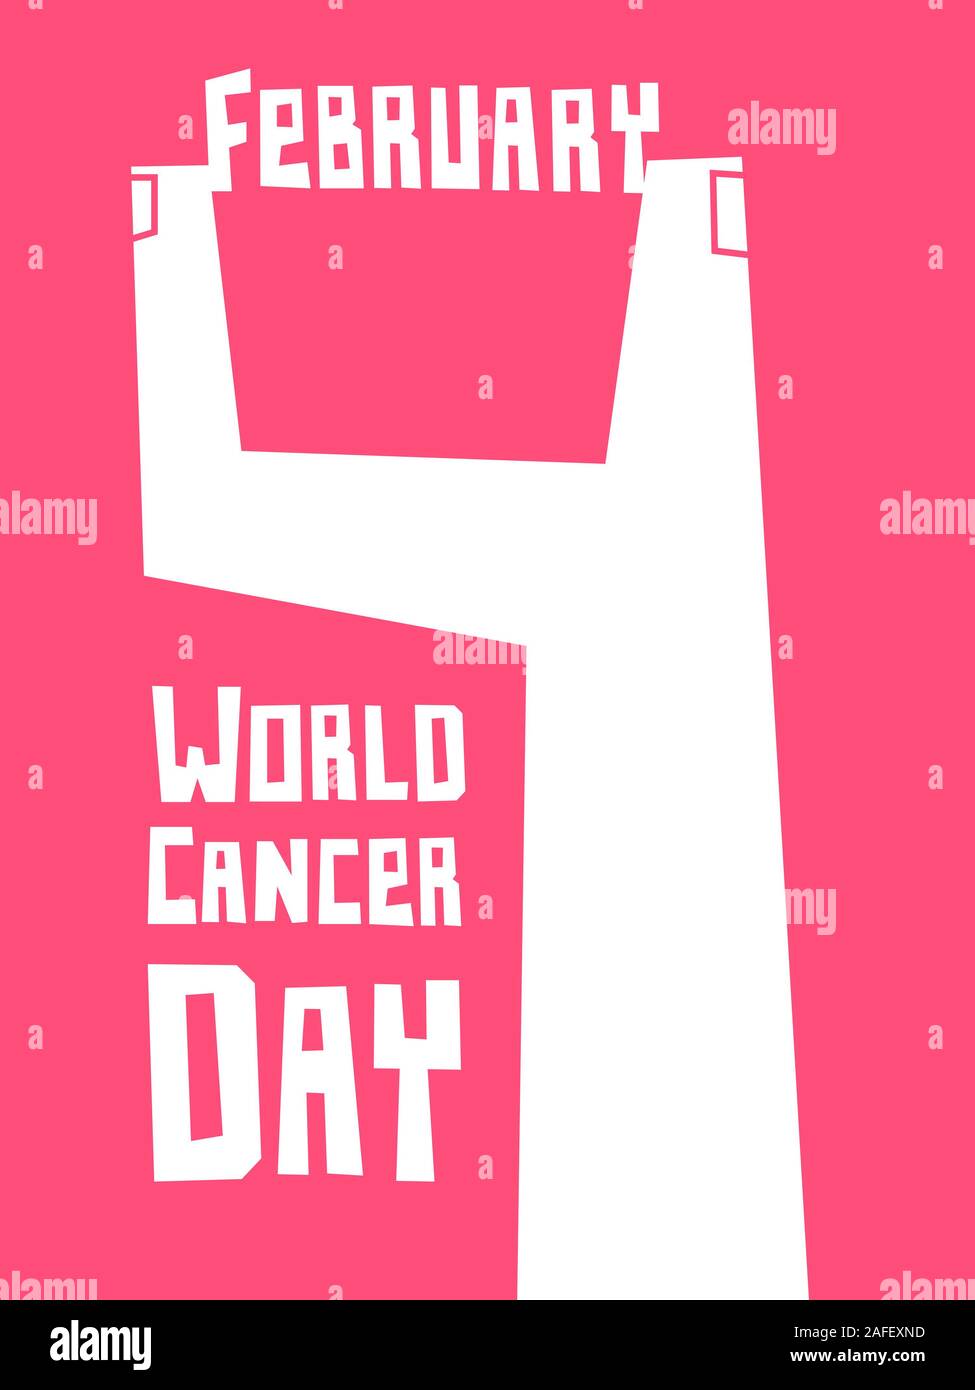 Hand stylized as number 4 holding the word February. World cancer day conceptual illustration. Stock Photo